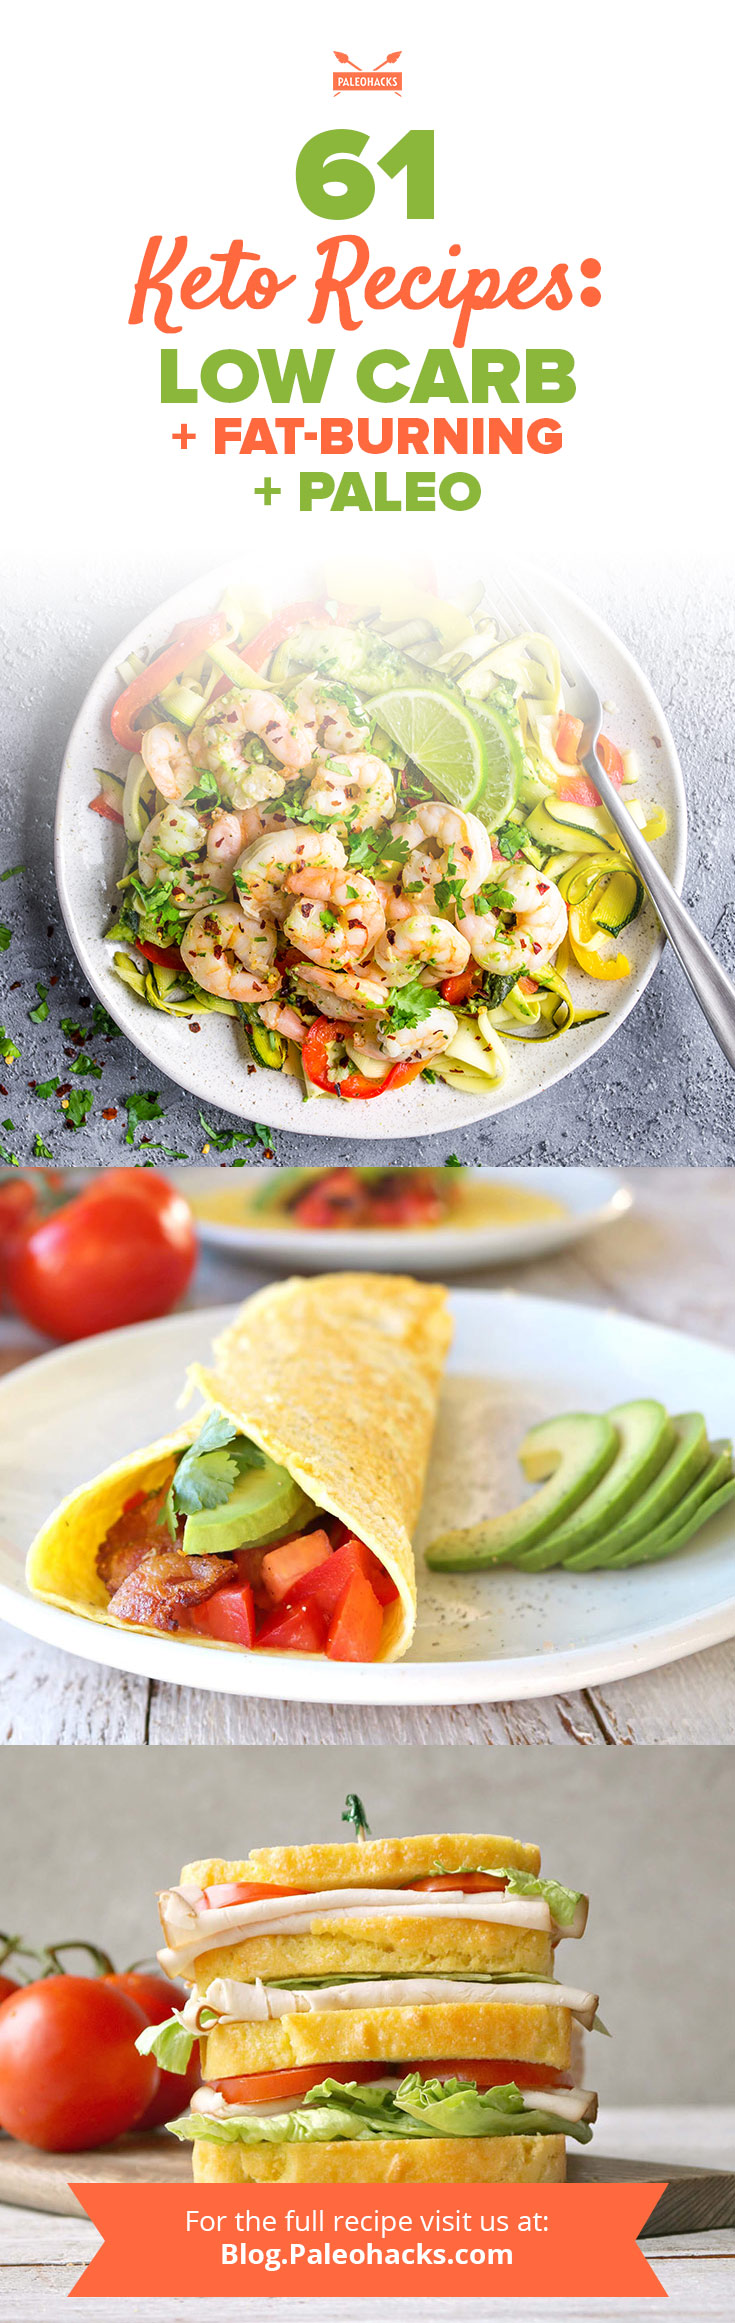 Worried about getting bored on a Paleo-keto diet? These 61 keto recipes will have you burning fat from breakfast to dessert, and even snacktime too.